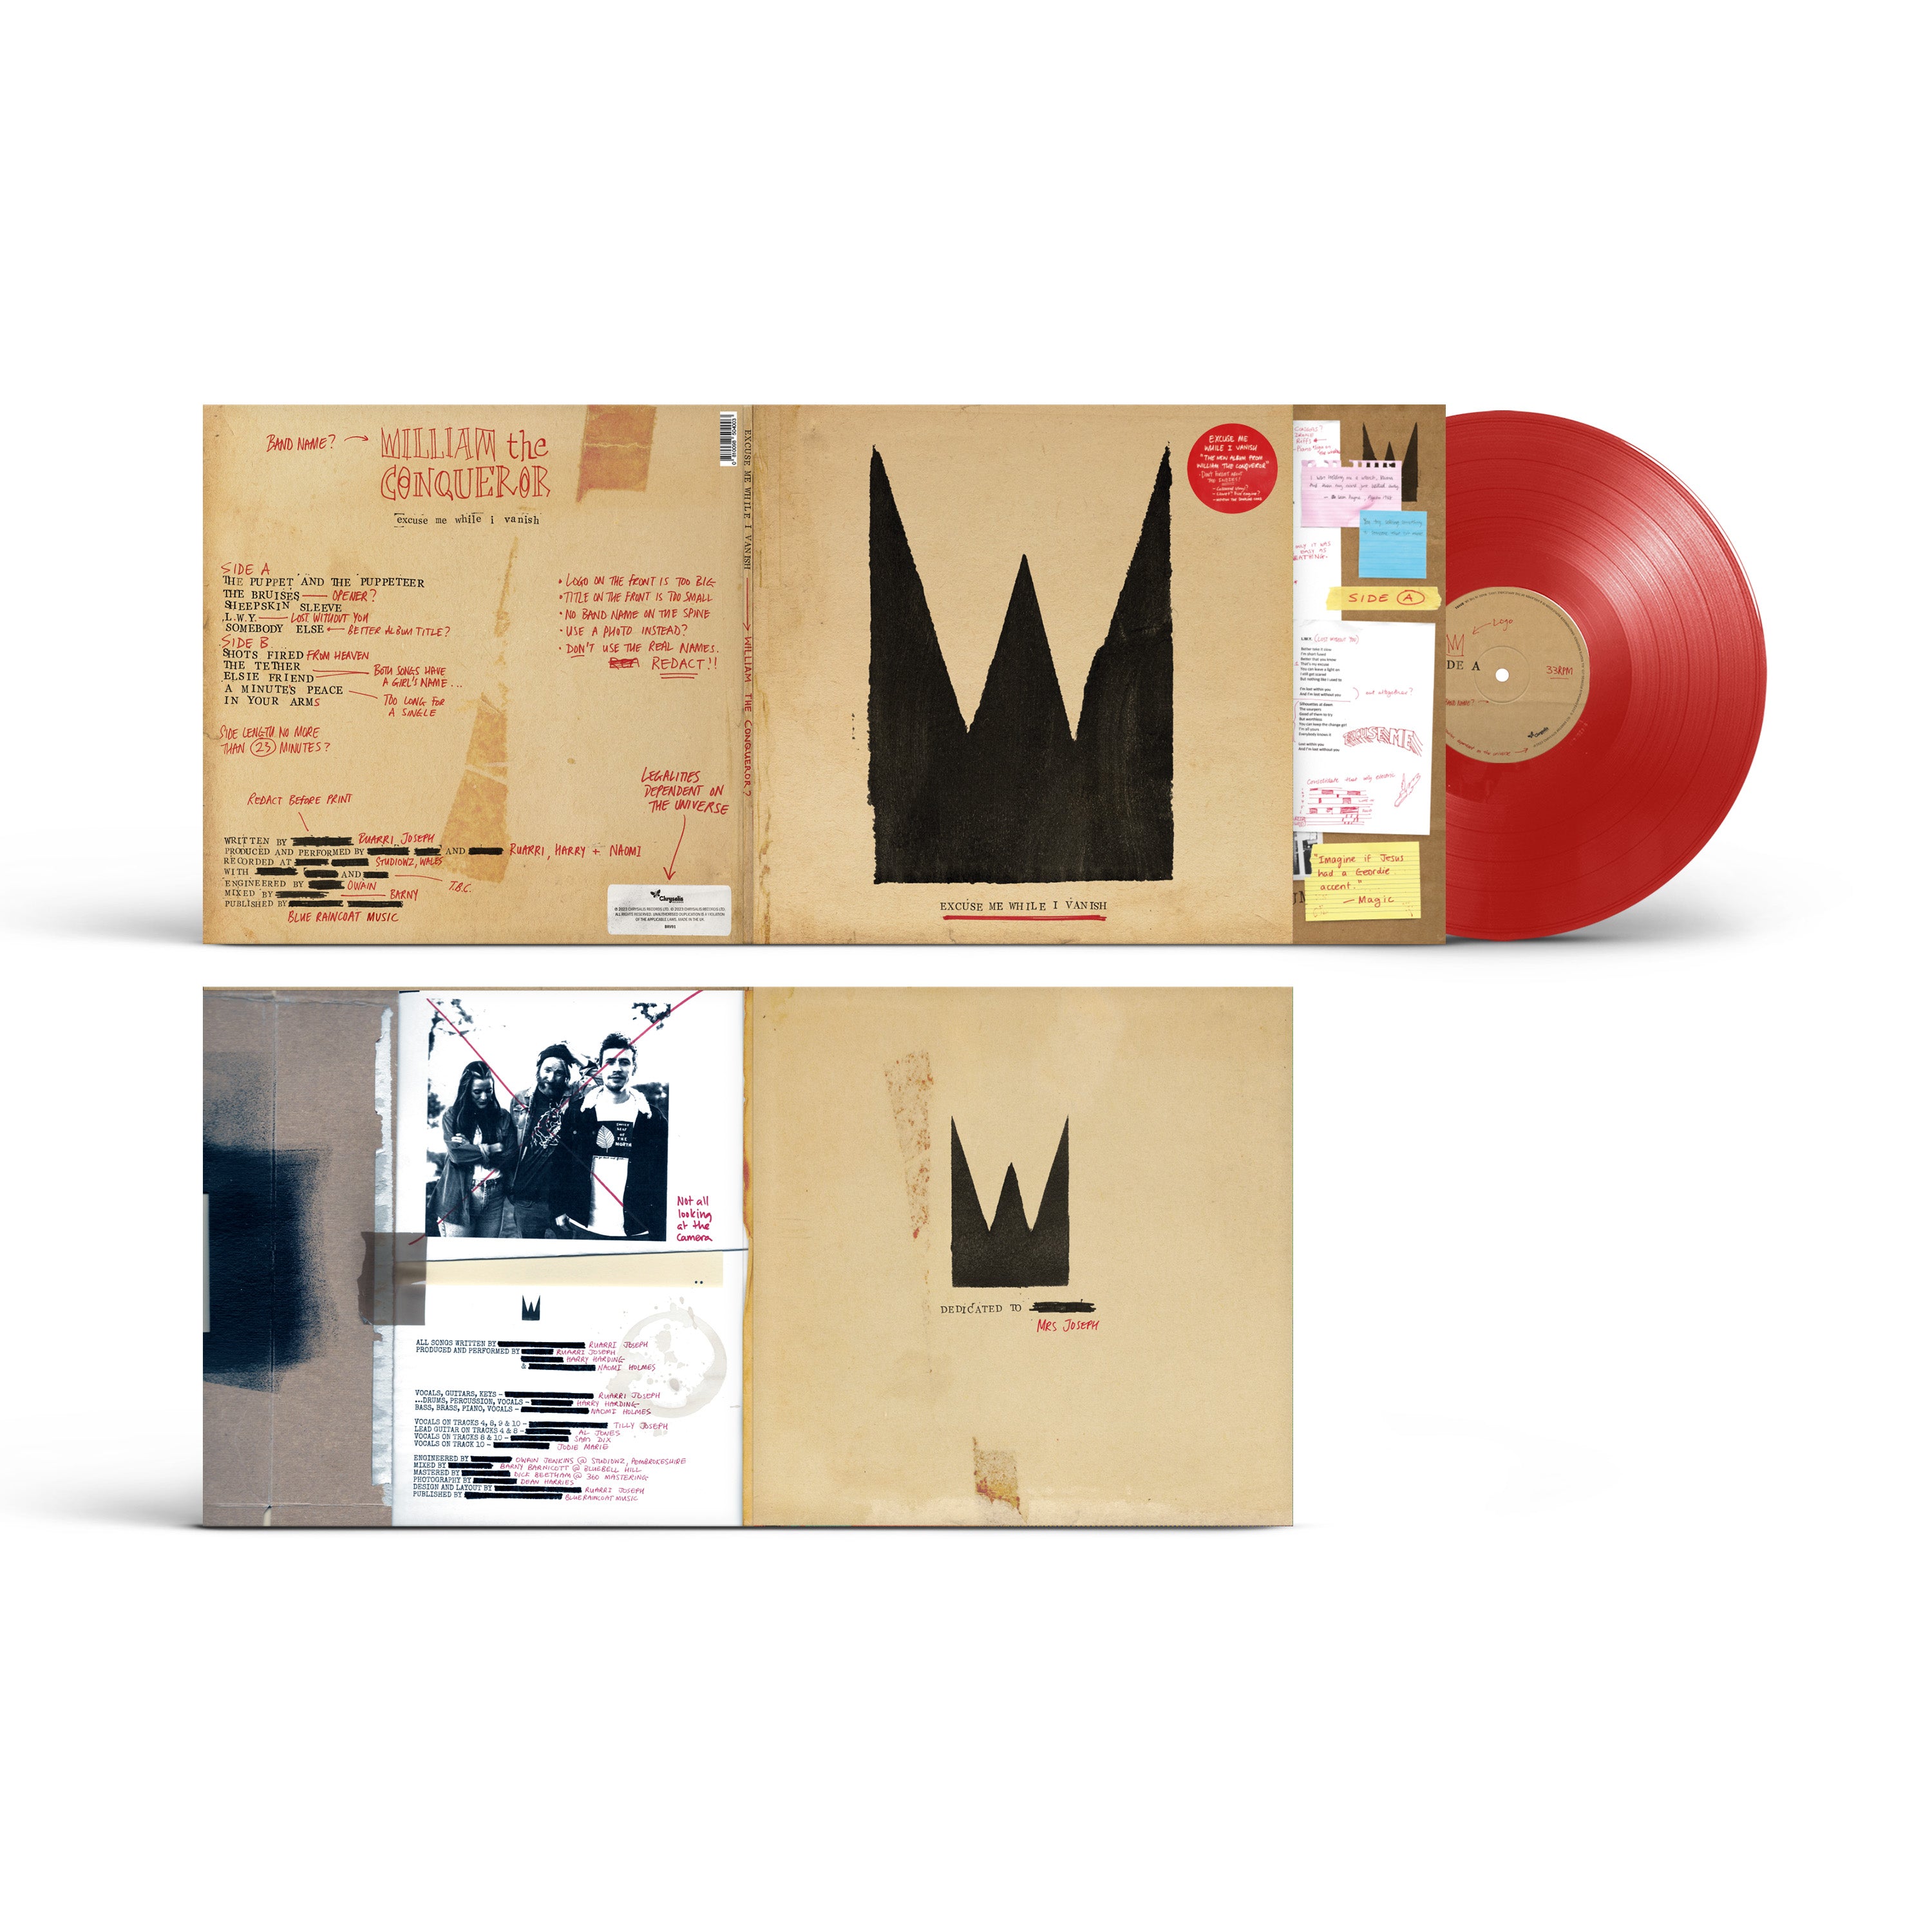 Excuse Me While I Vanish: Limited Edition Blood Red Vinyl LP